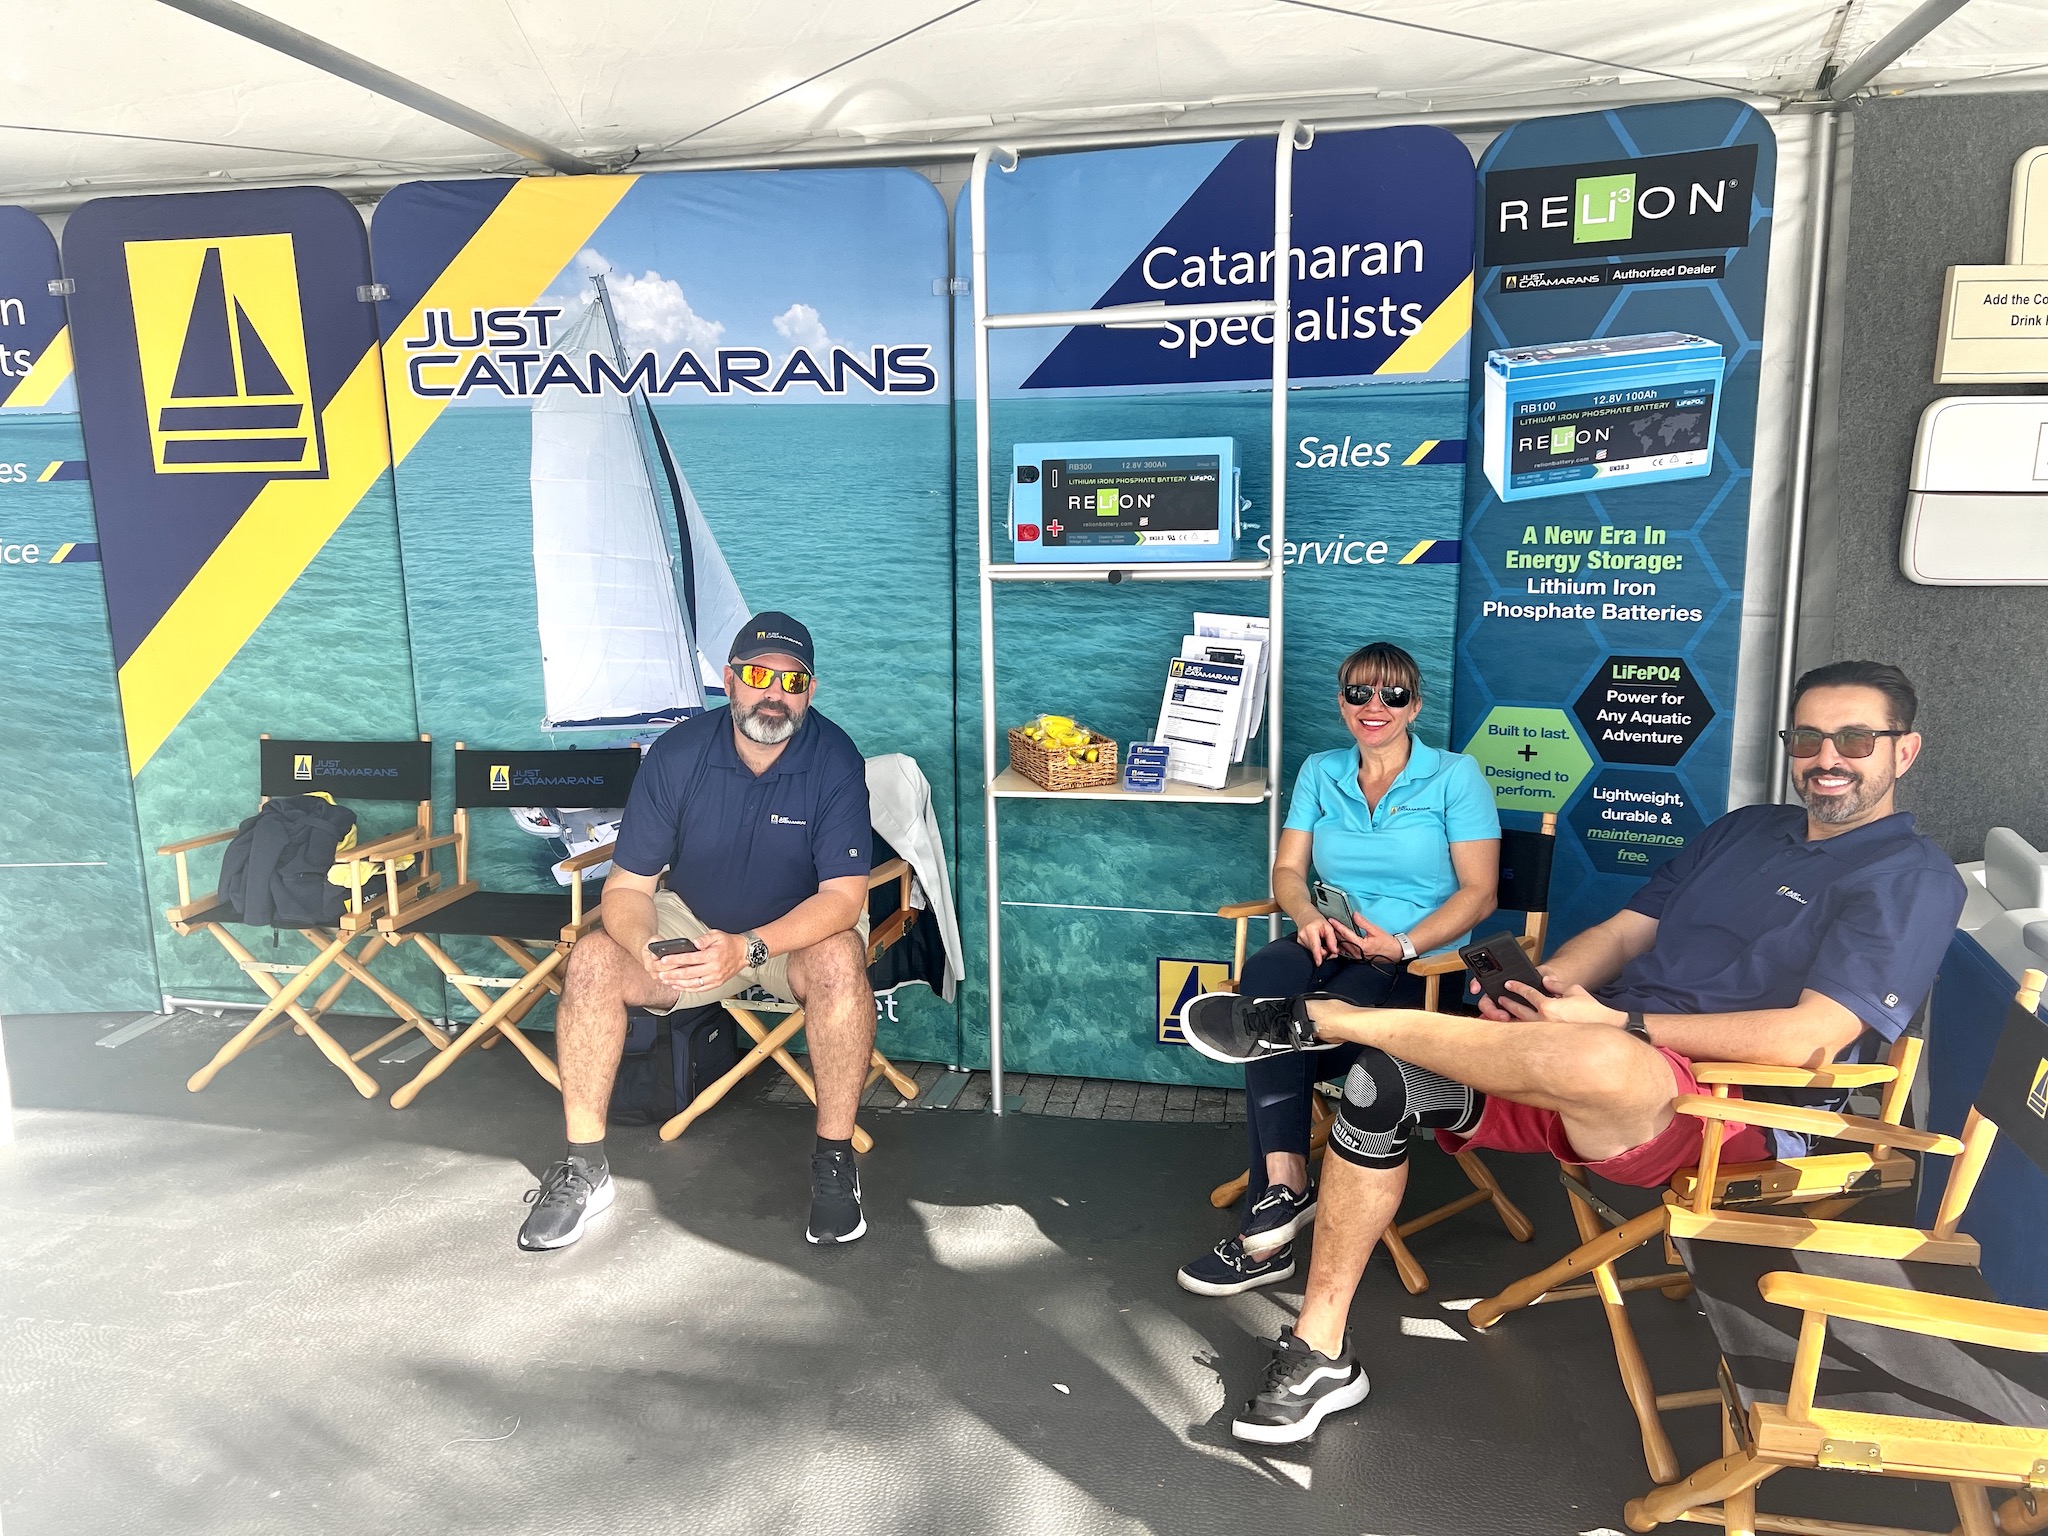 Miami Boat Show with Just Catamarans